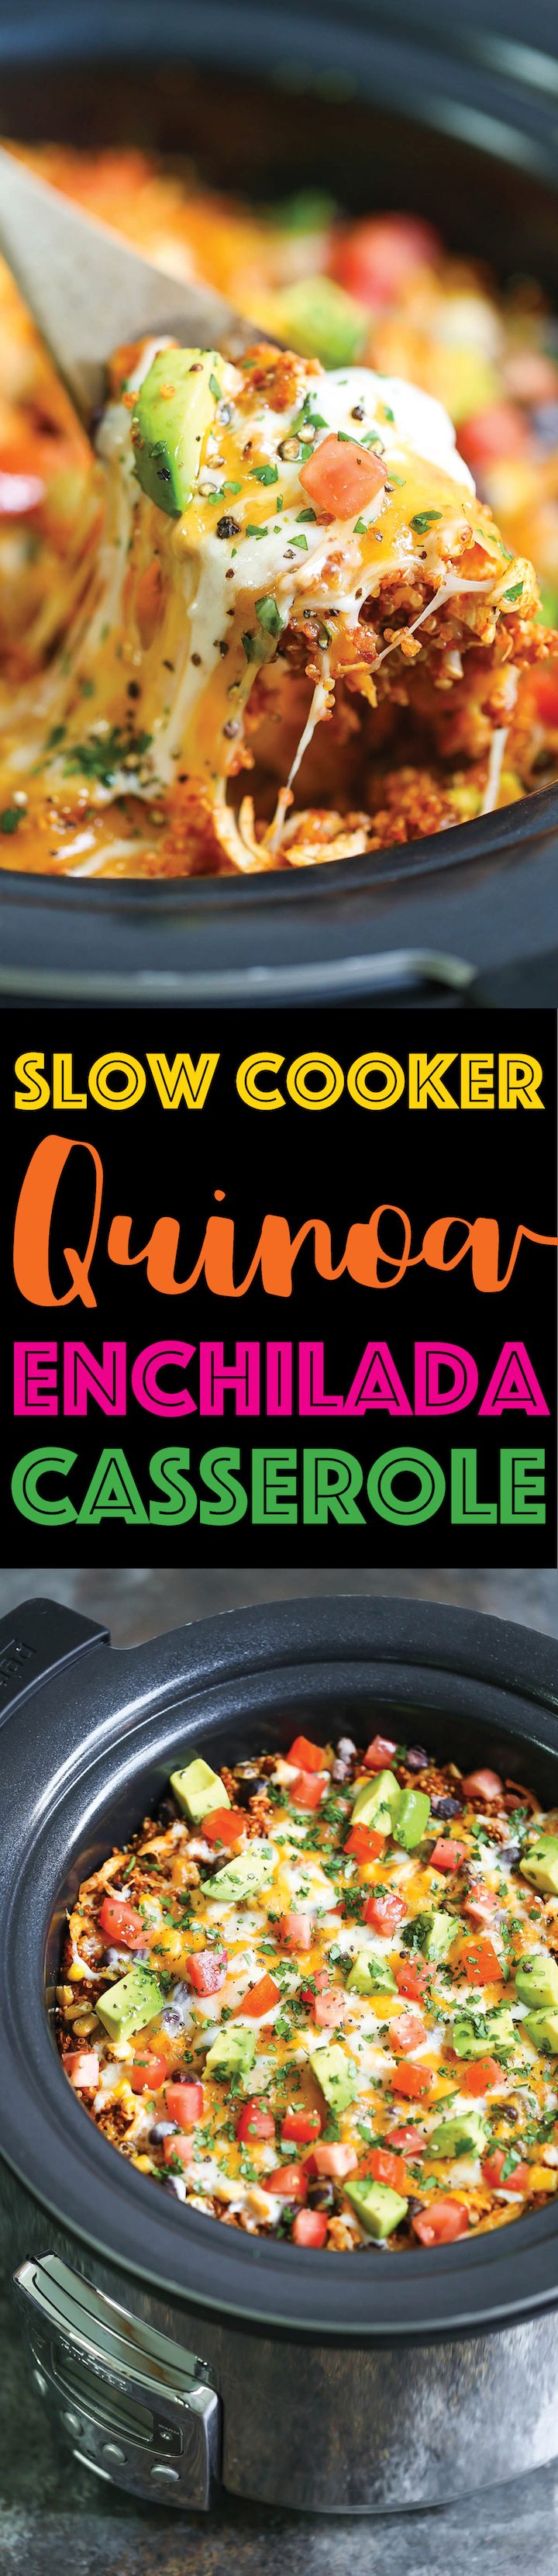 Slow Cooker Quinoa Enchilada Casserole - SKINNY, lightened up and healthy enchilada bake!!!! Made right in the crockpot!!! So cheesy and yet guilt-free!!!